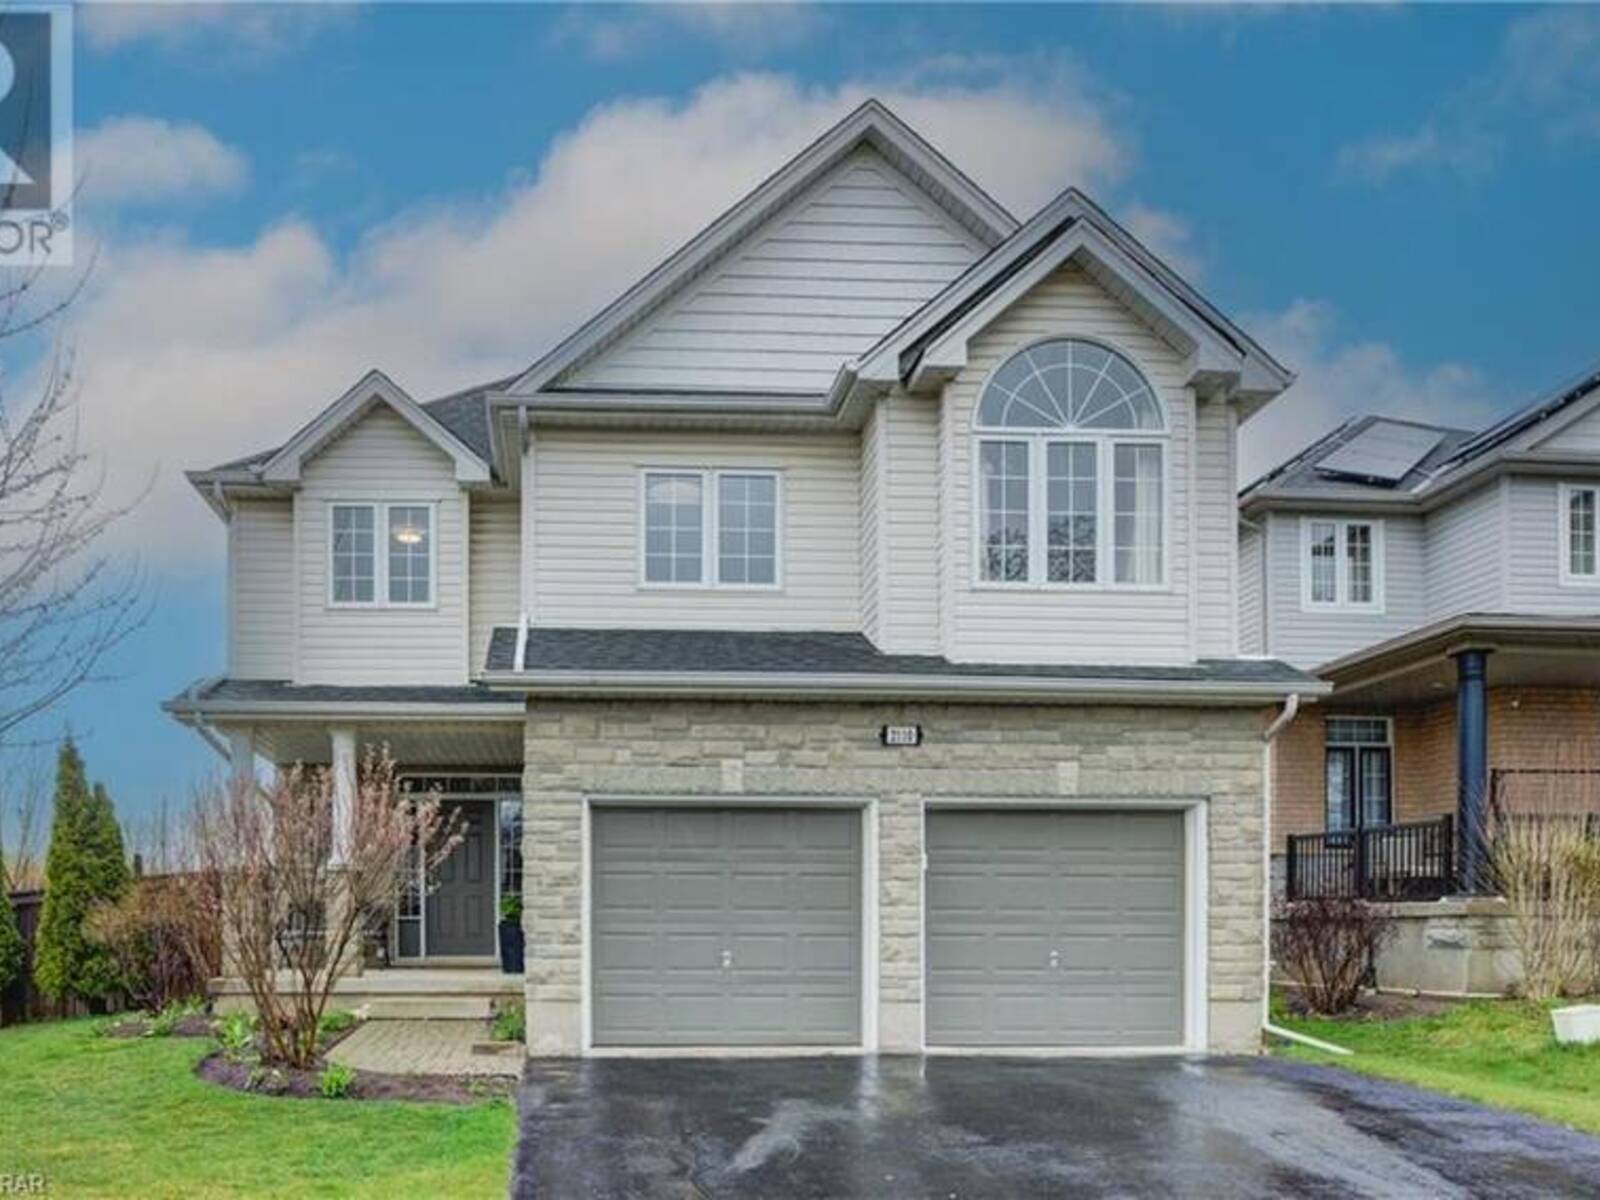 2110 COUNTRYSTONE Place, Kitchener, Ontario N2N 3L7